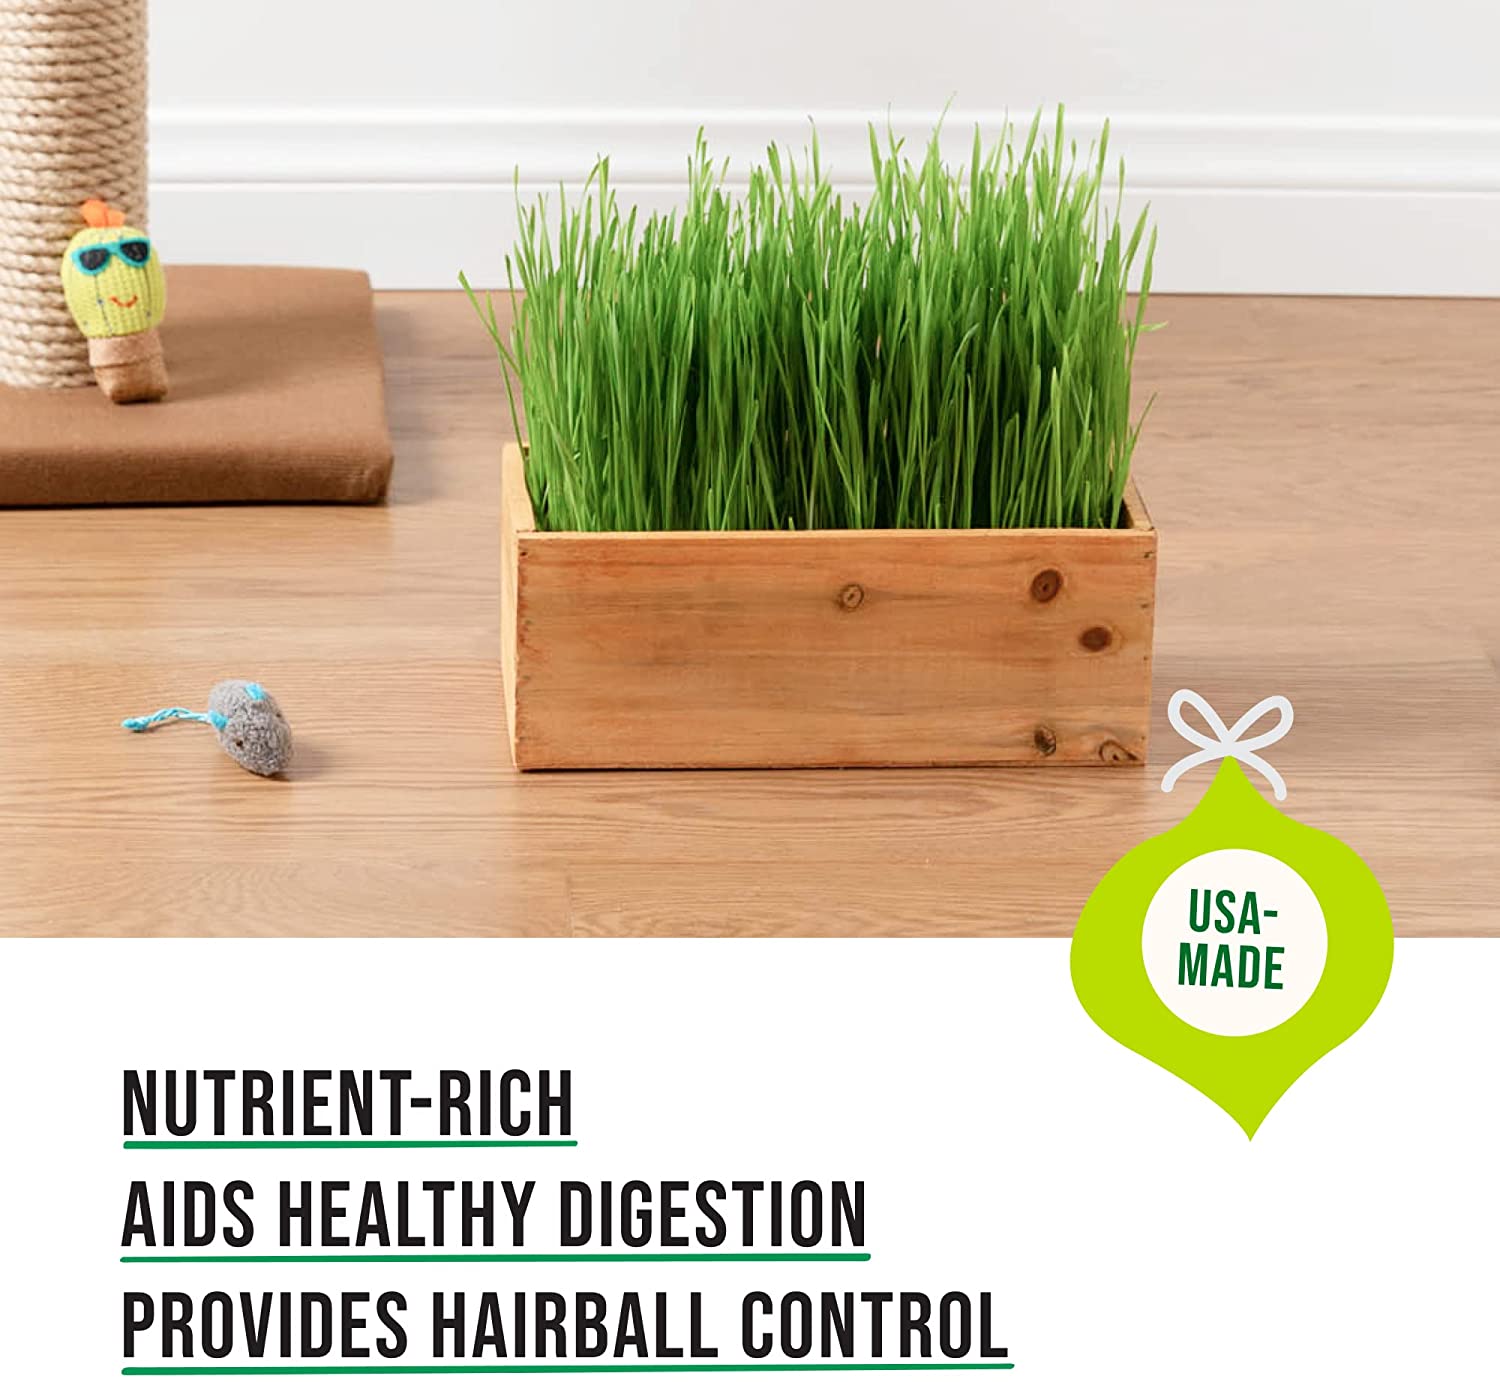 Cat Grass Kit (Organic) Complete with Rustic Wood Planter, Seed and Soil. Easy to Grow - Great for Indoor or Outdoor Cat, Dogs and Other Pets. Prevent Hairballs and Aid Digestion?